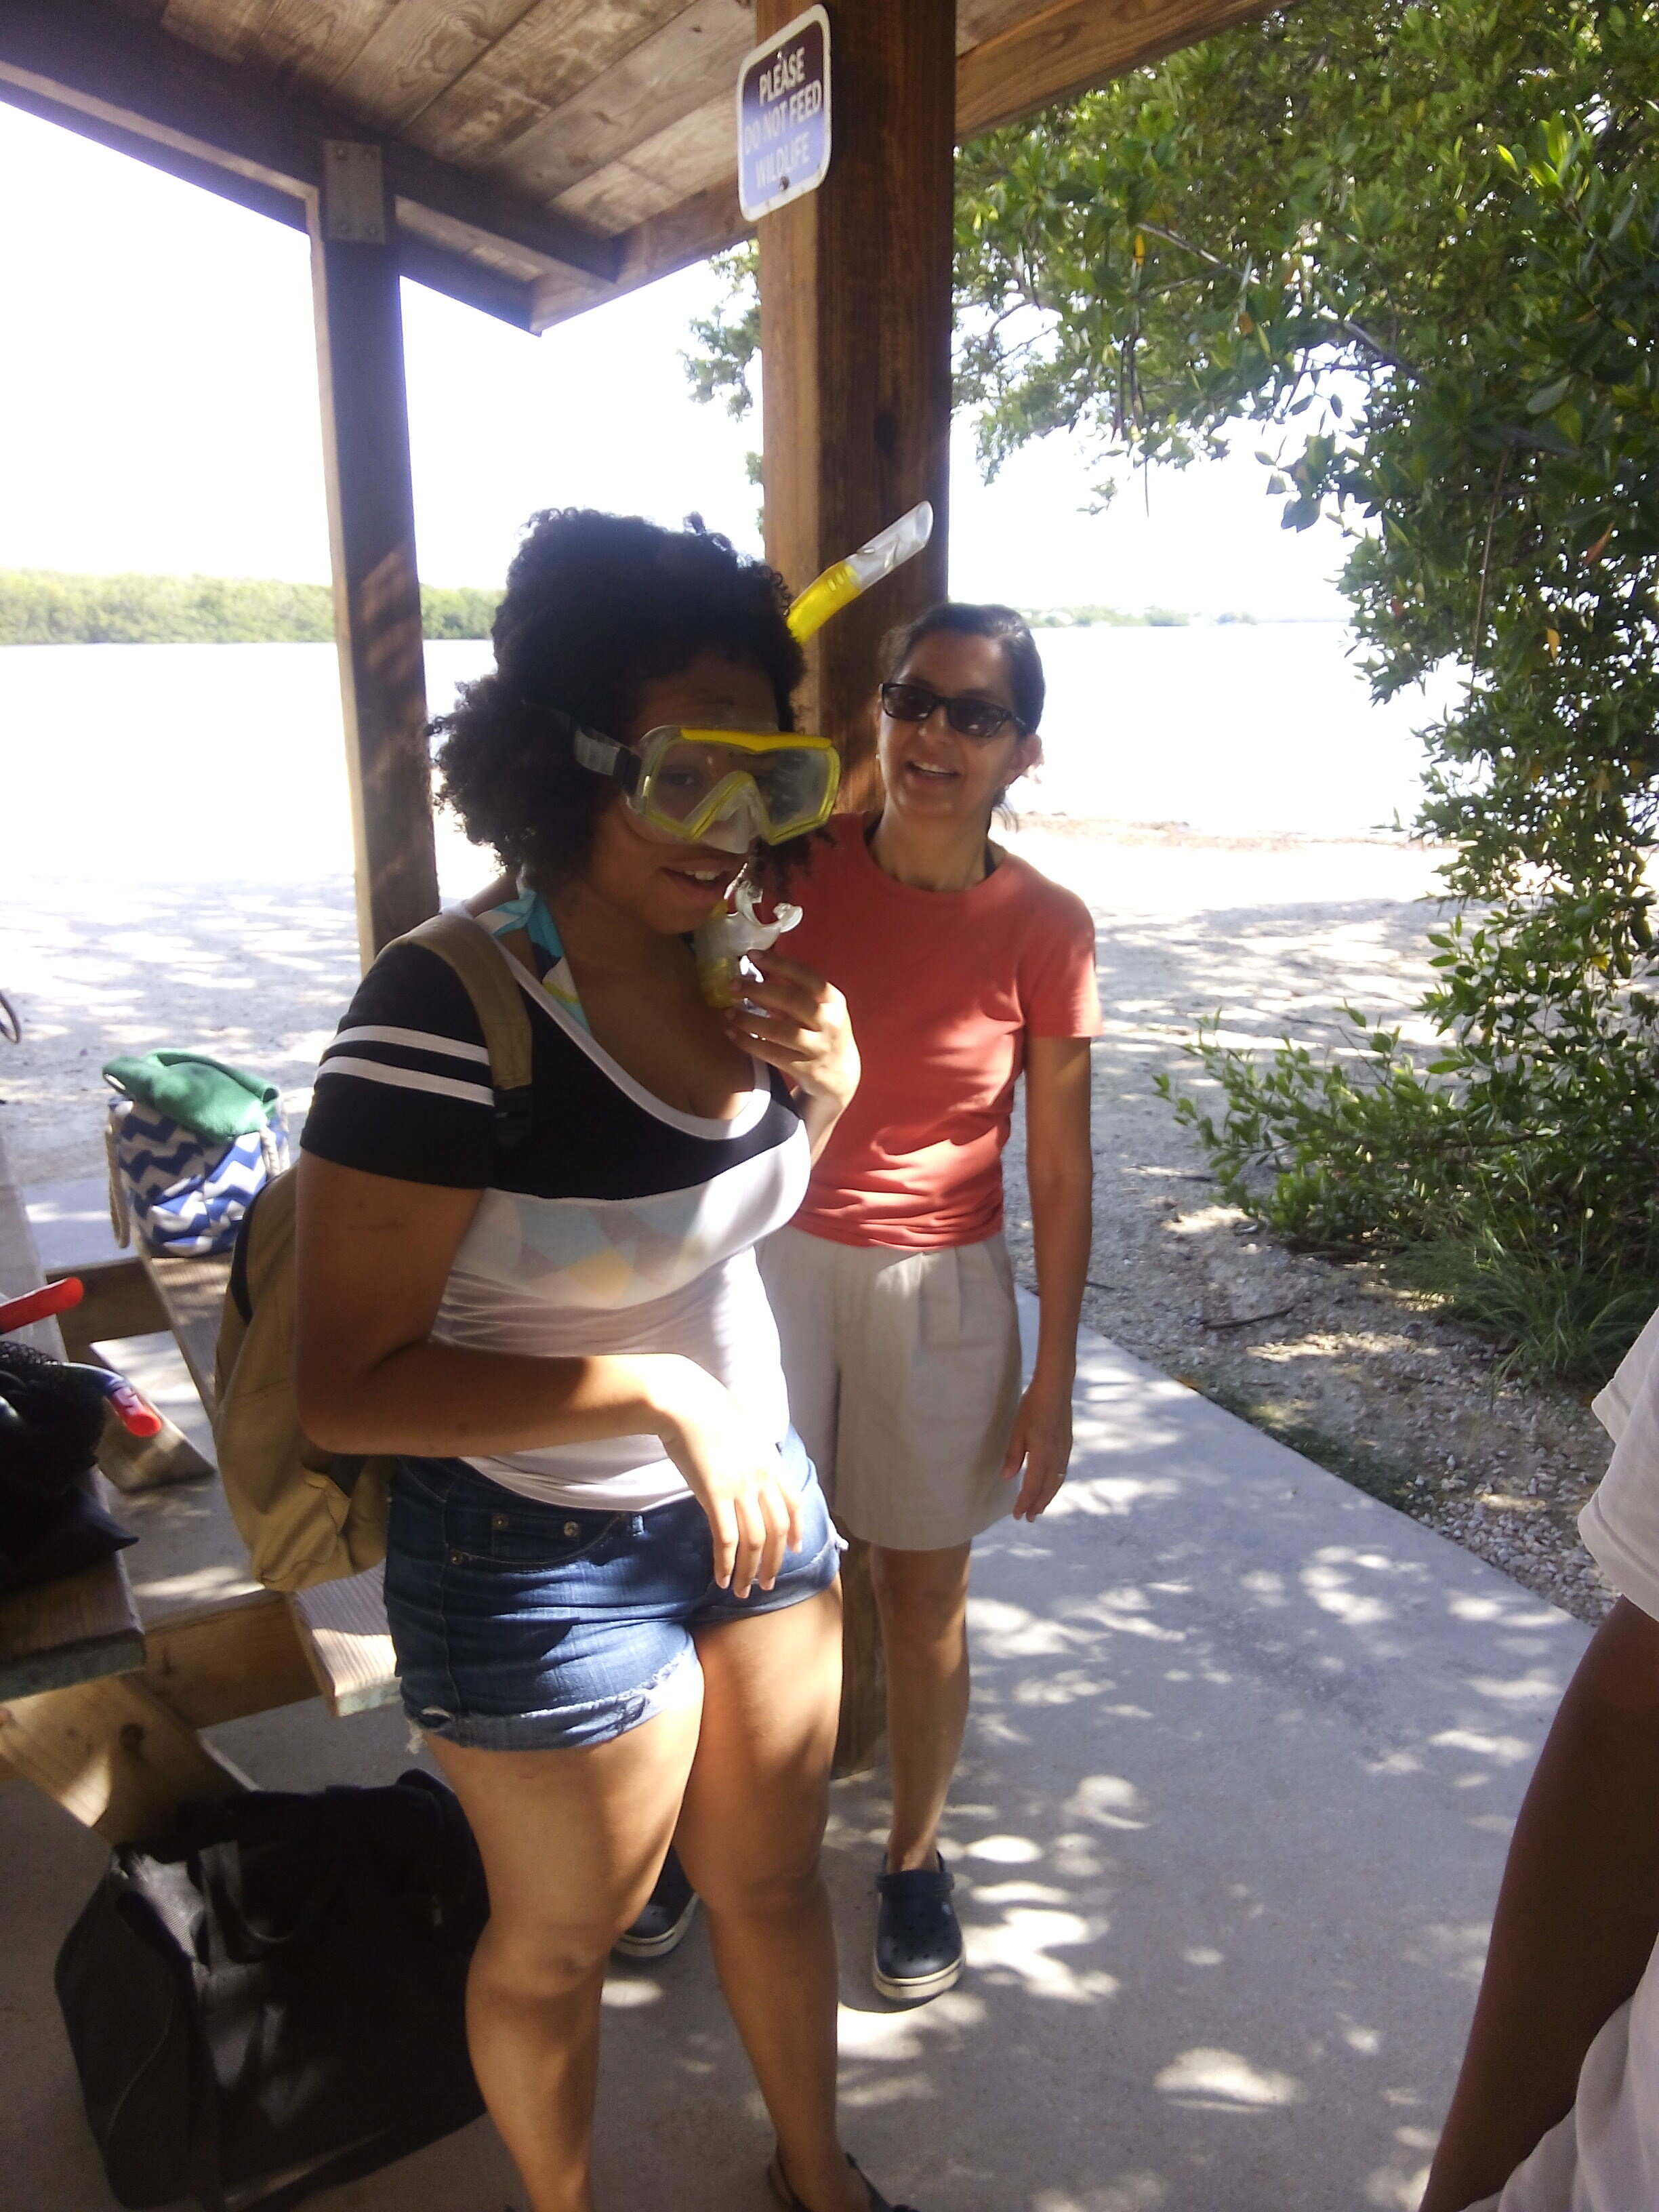 Trying on Snorkeling Gear with Inner City Outings